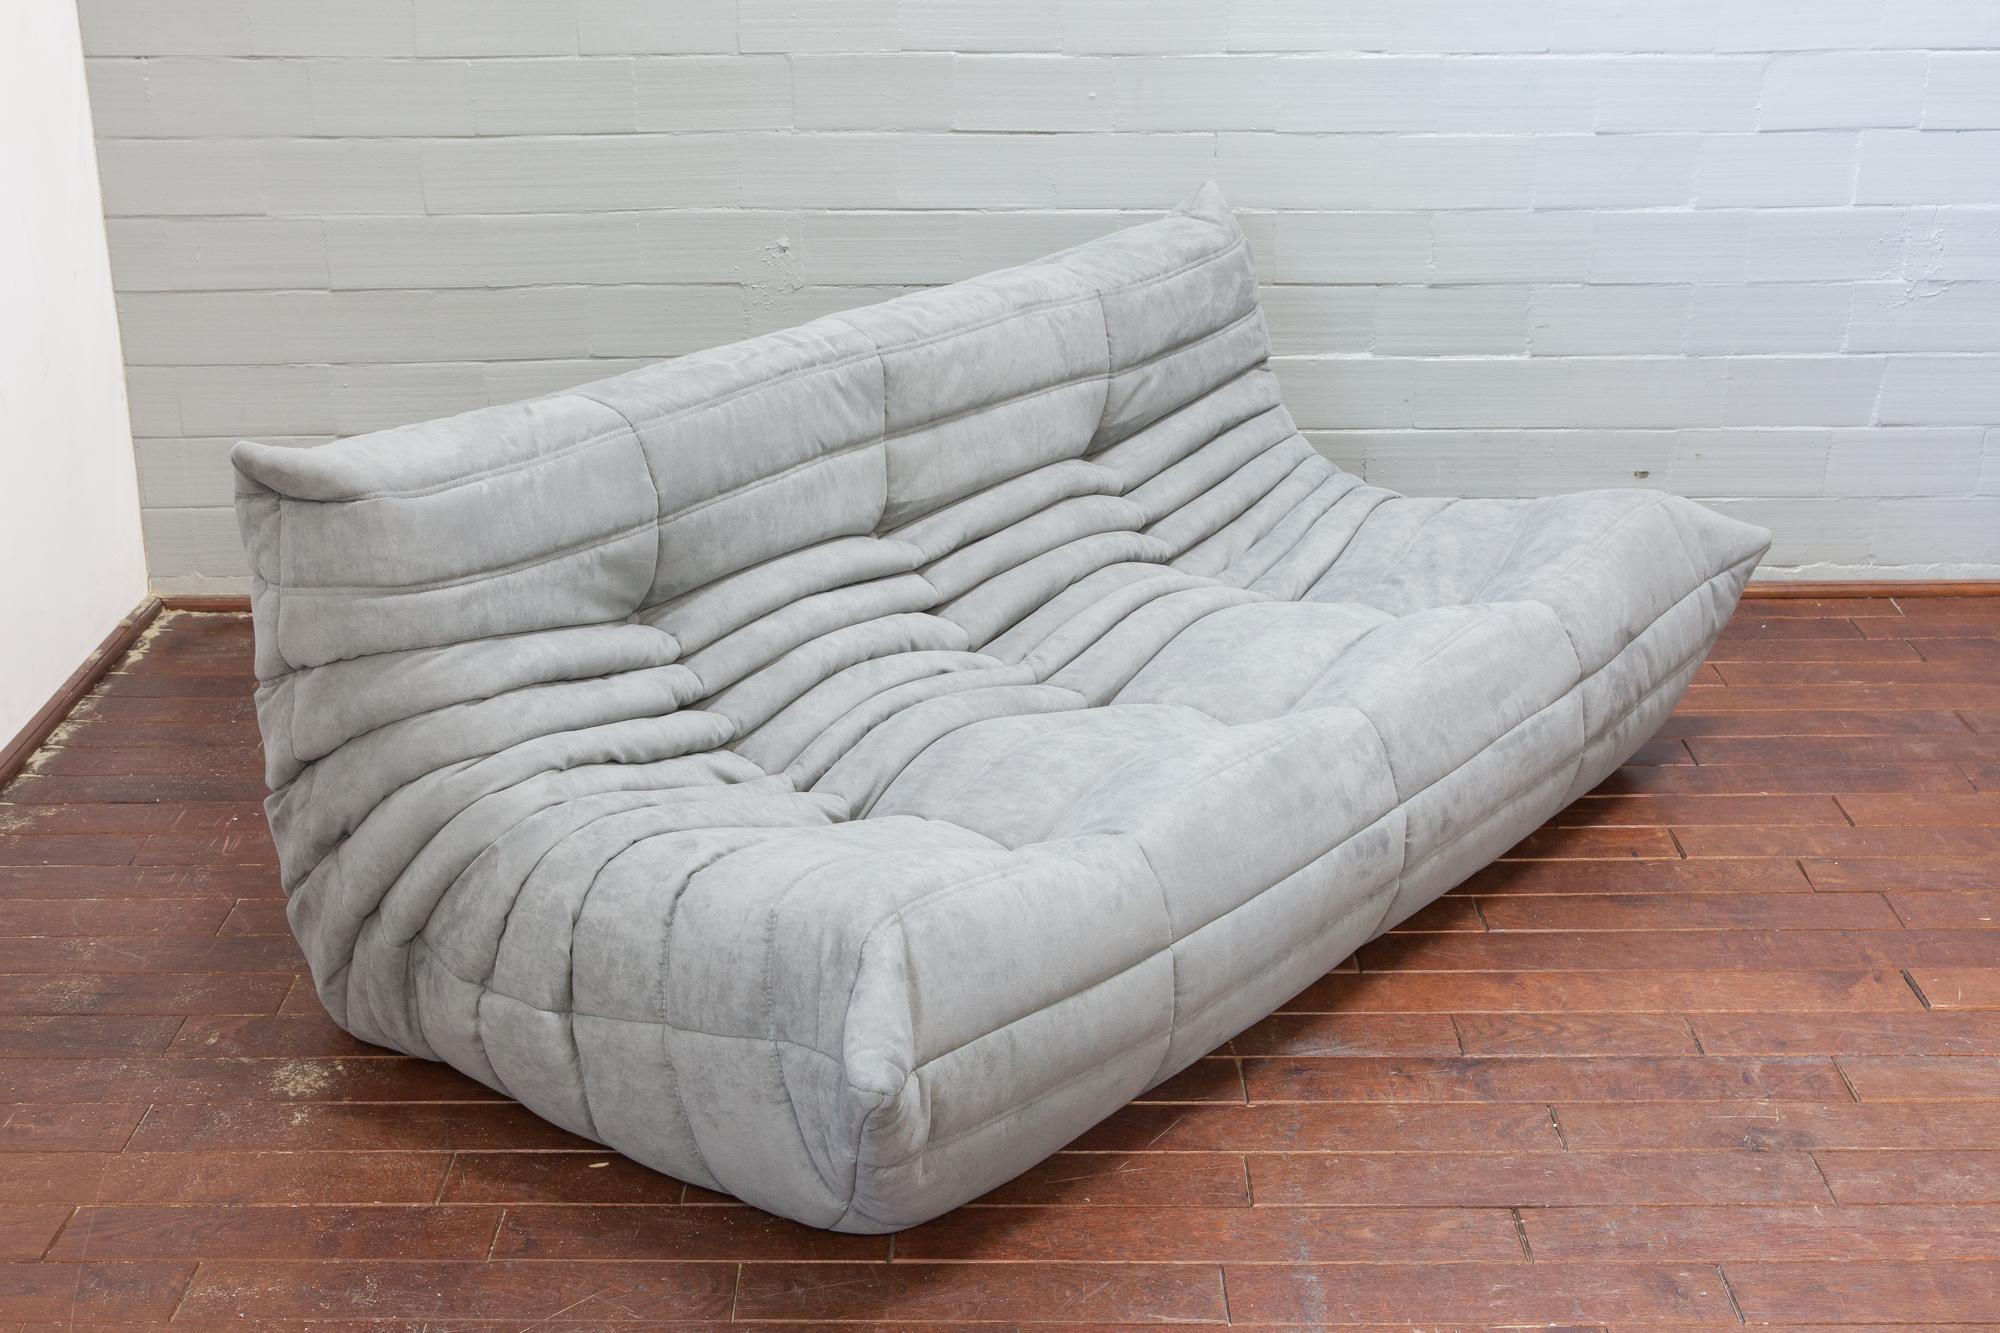 This Togo three-seat sofa was designed by Michel Ducaroy in 1973 and was manufactured by Ligne Roset in France. It has been reupholstered in new light grey microfibre (70 x 174 x 102 cm). It has the original Ligne Roset logo and genuine Ligne Roset